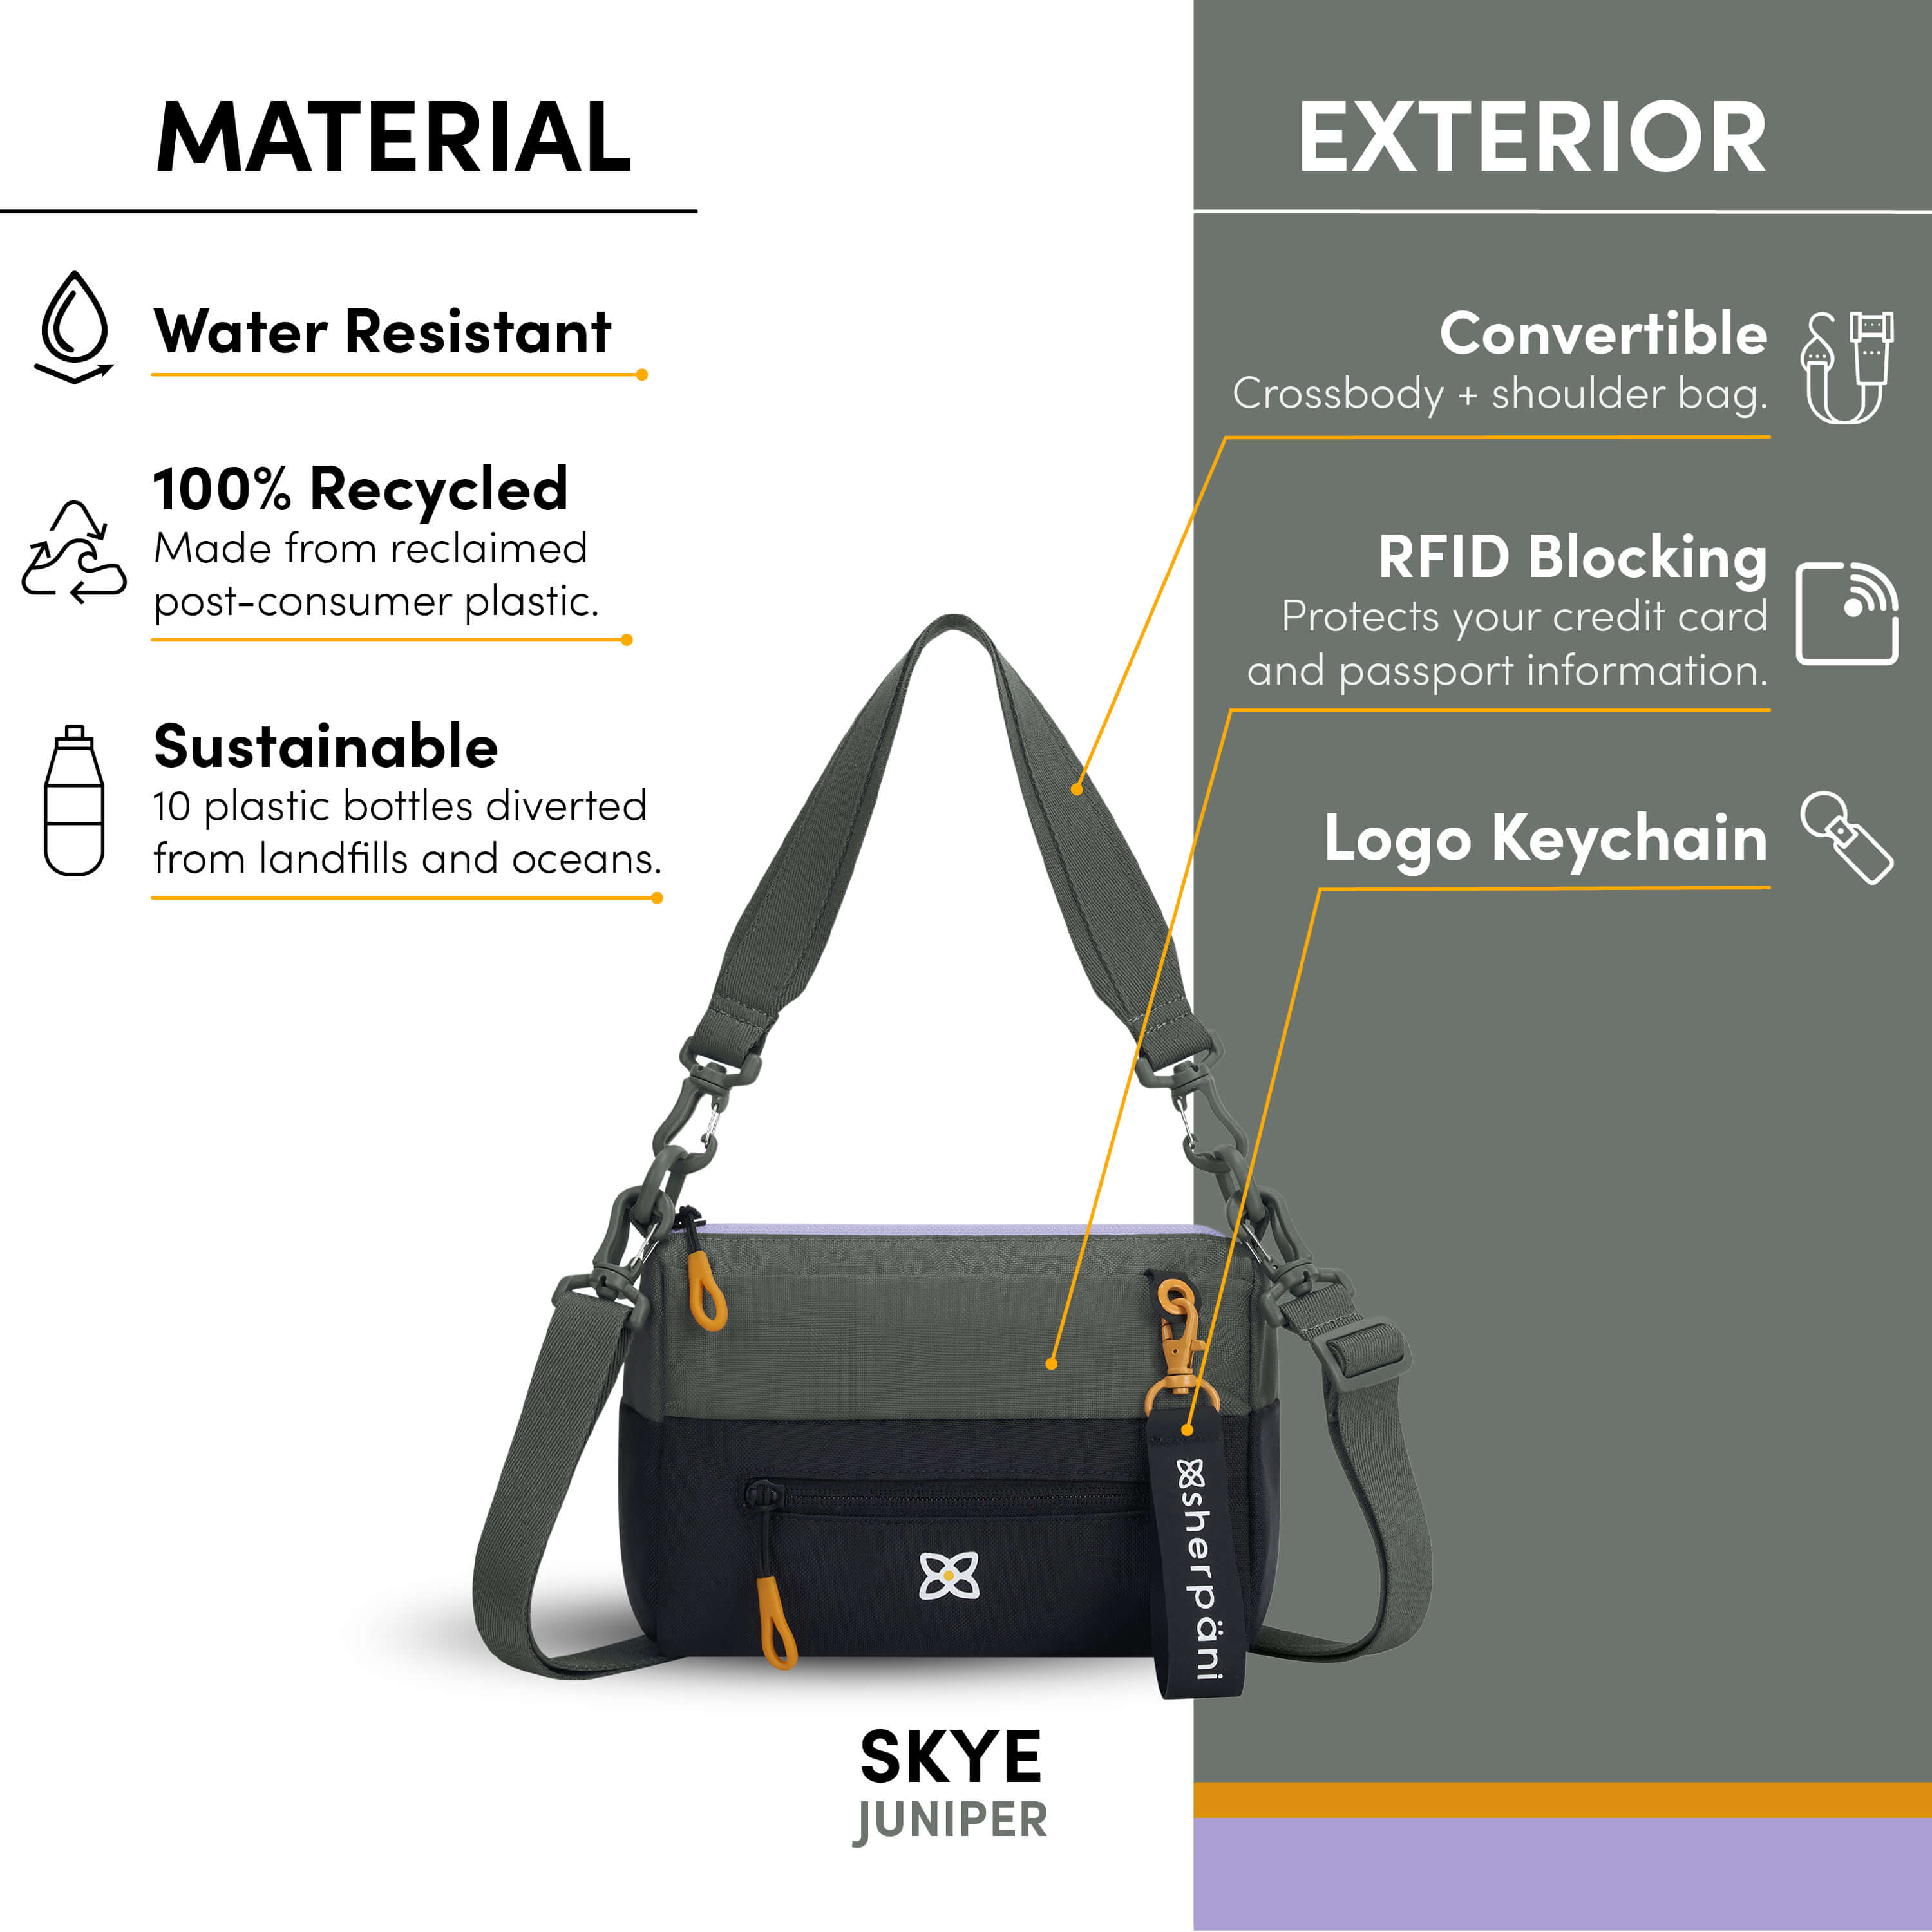 Graphic showing the features of Sherpani women's shoulder bag, the Skye: water-resistant purse, sustainable handbag made from recycled materials, two detachable strap options for two ways to style (shoulder bag, crossbody), RFID protection and Sherpani logo keychain. 